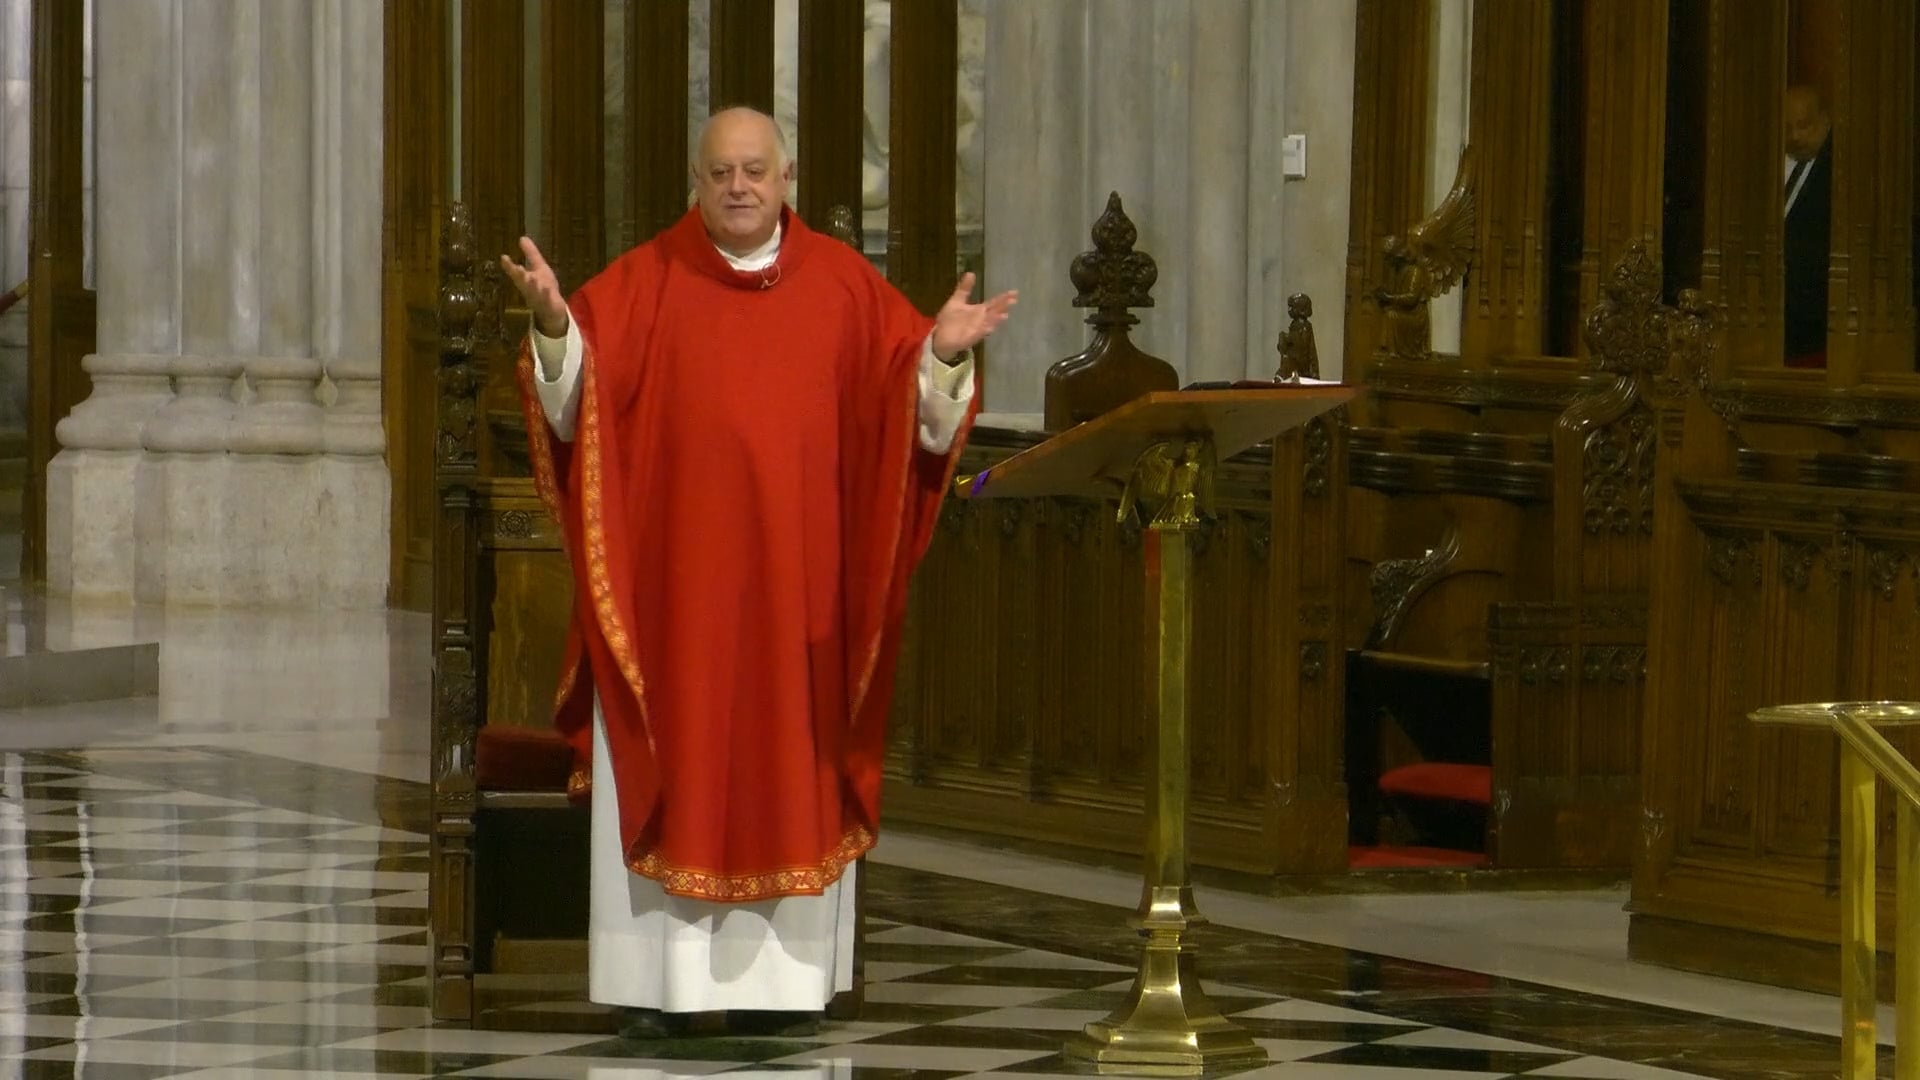 Mass from St. Patrick's Cathedral - September 26, 2022